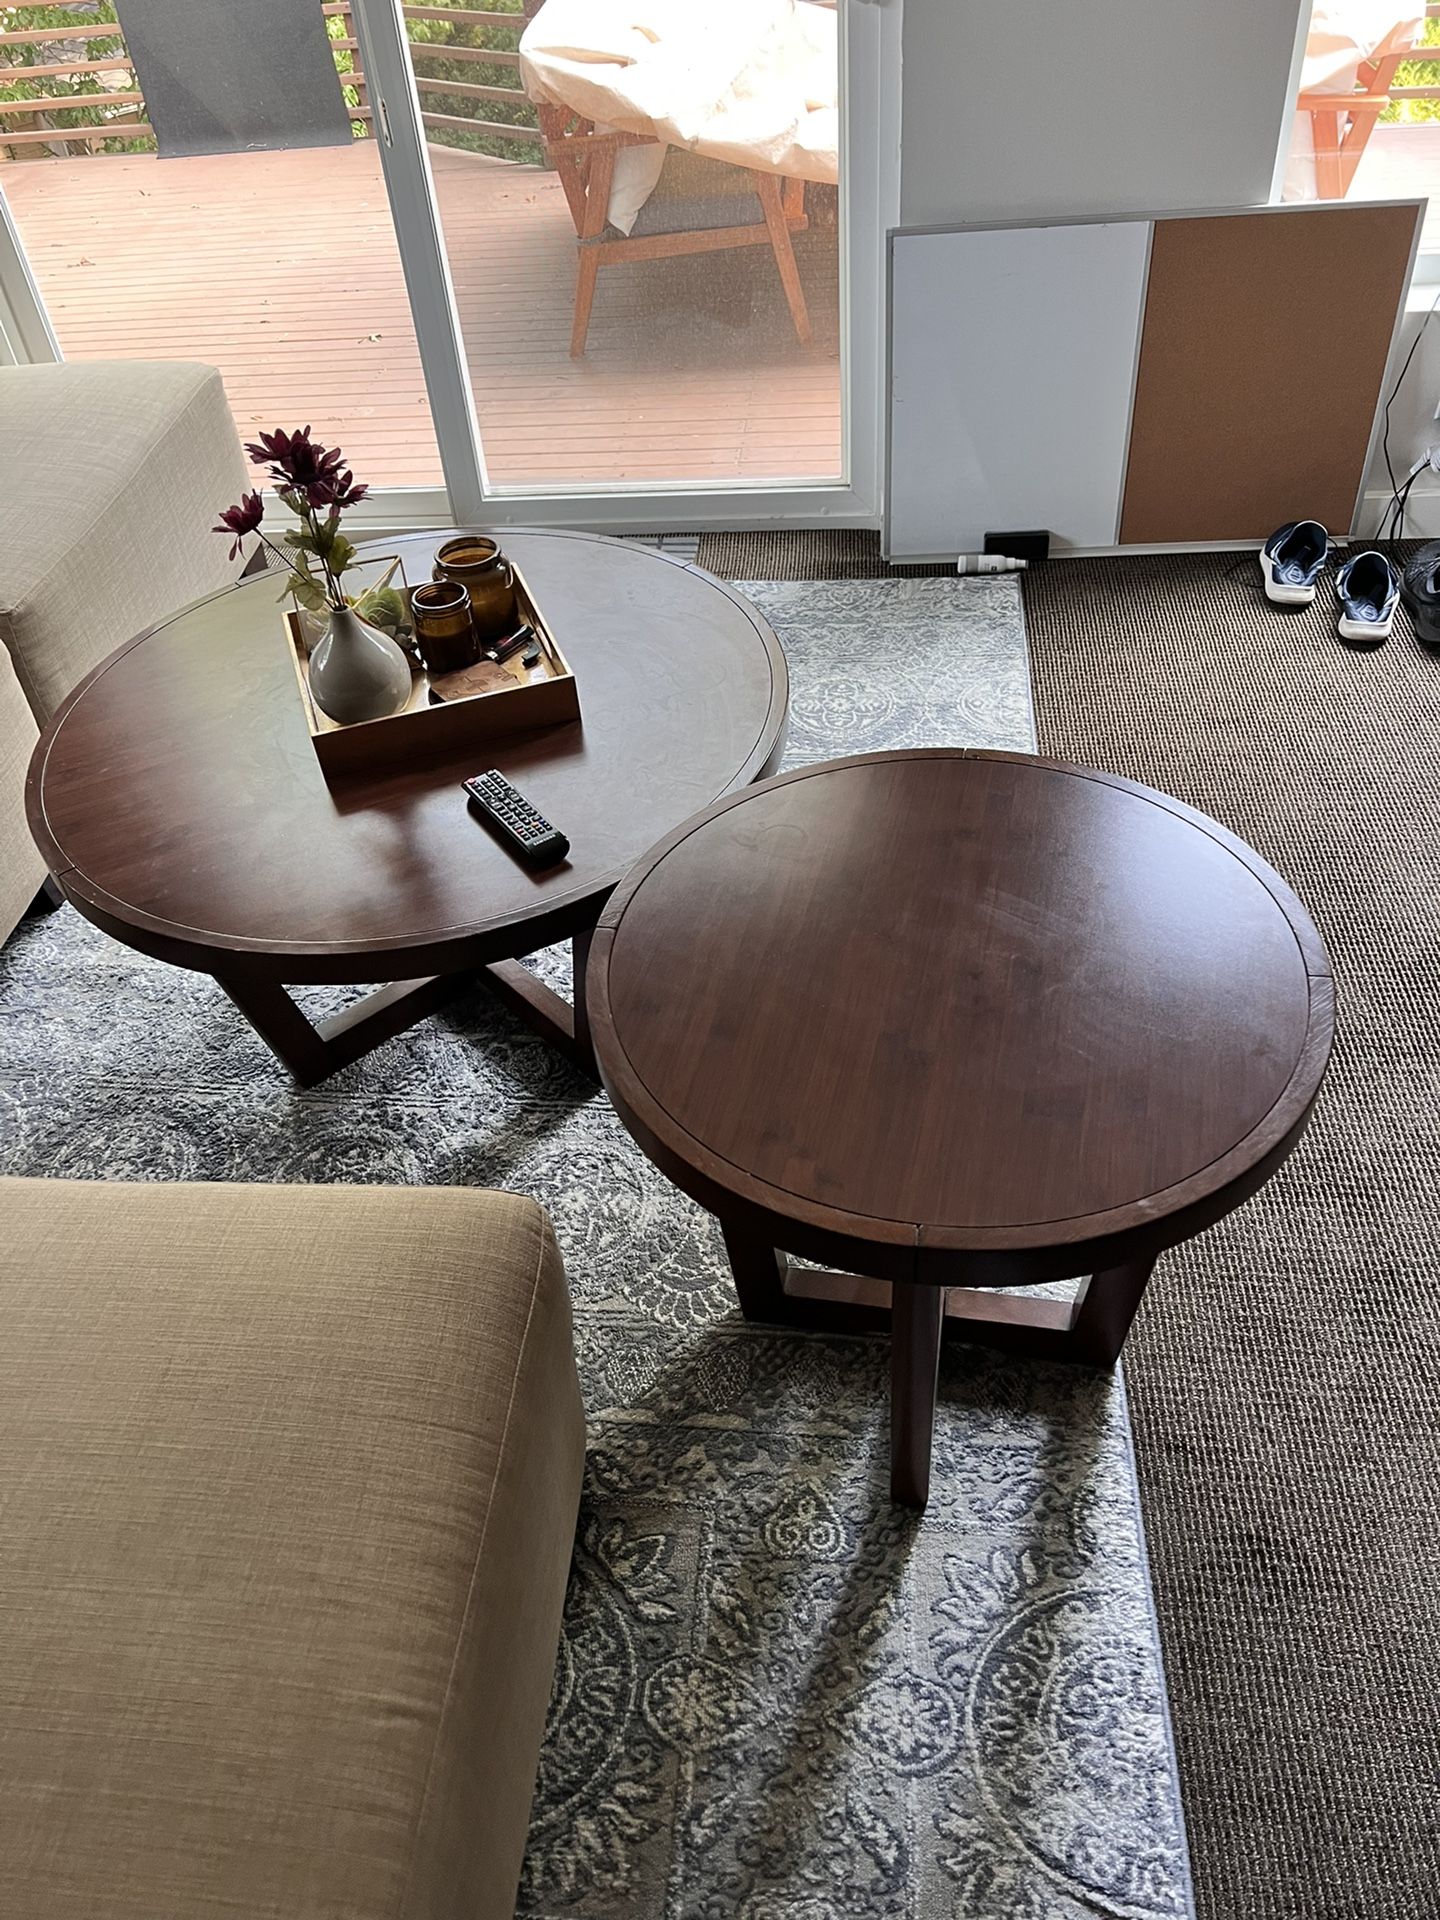 FREE Moving SALE! Coffee Table, Chair, Standing Desk